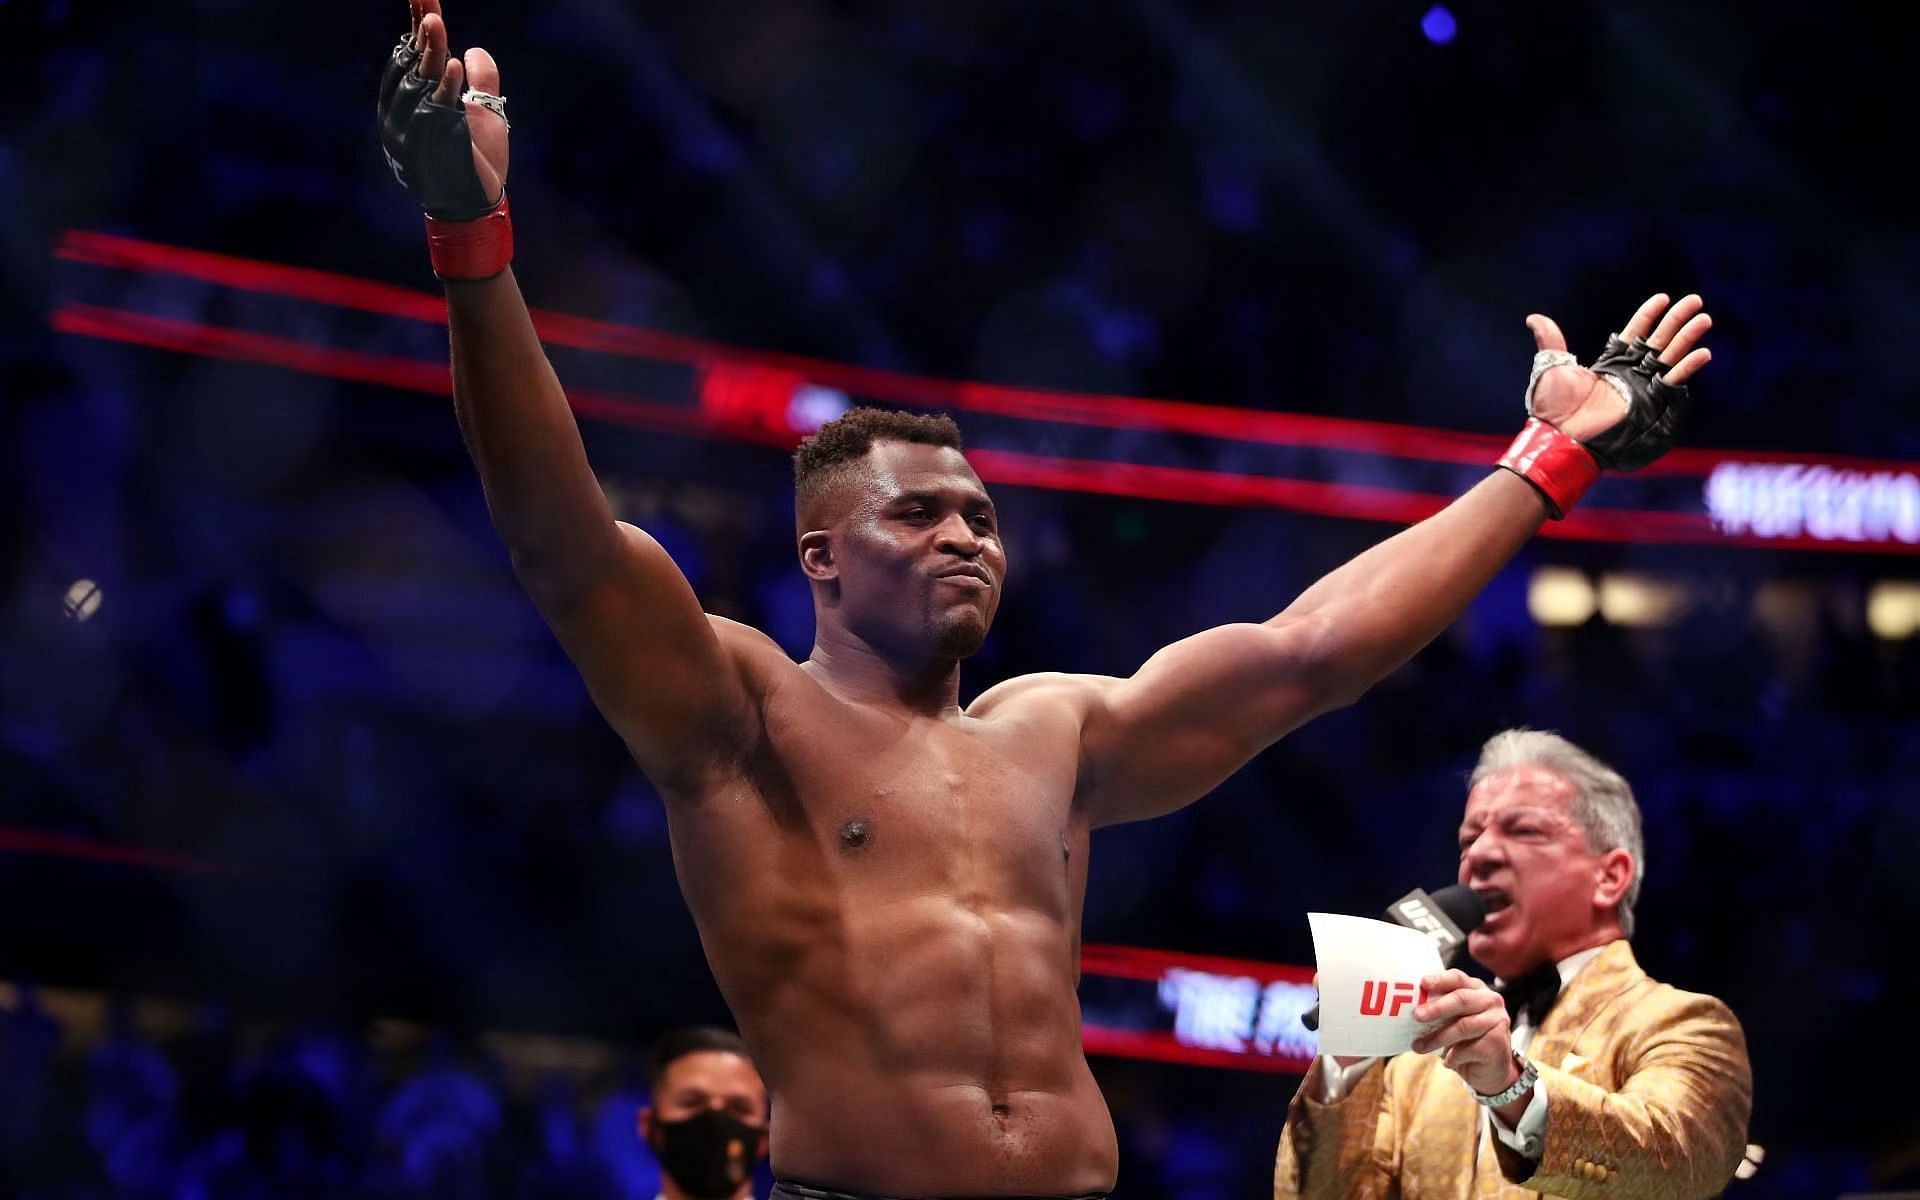 Francis Ngannou has left the UFC, but will the promotion be all that bothered?